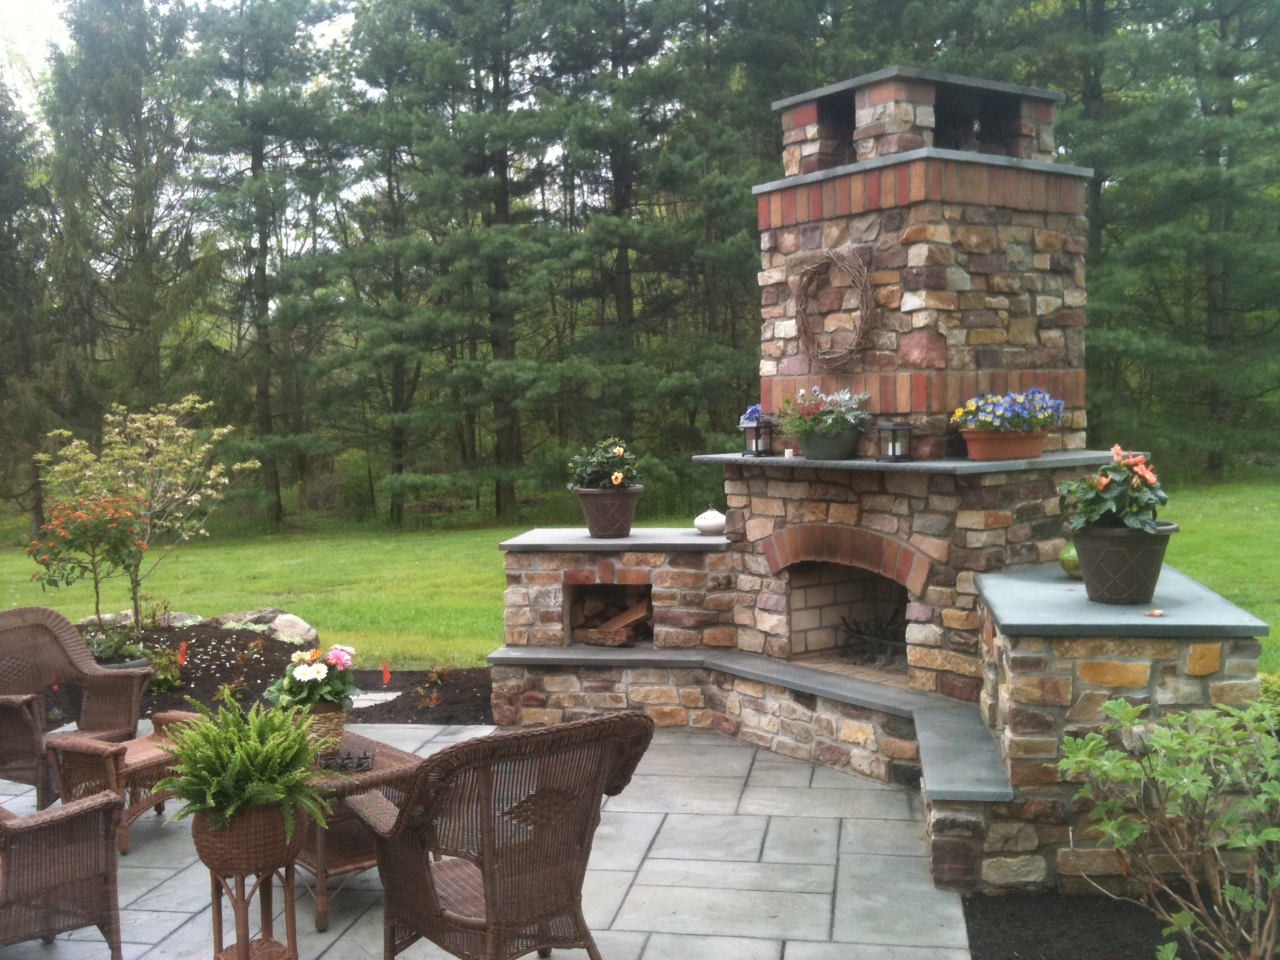 Tag Archive for "Outdoor Fireplace Ideas" - Landscaping ...